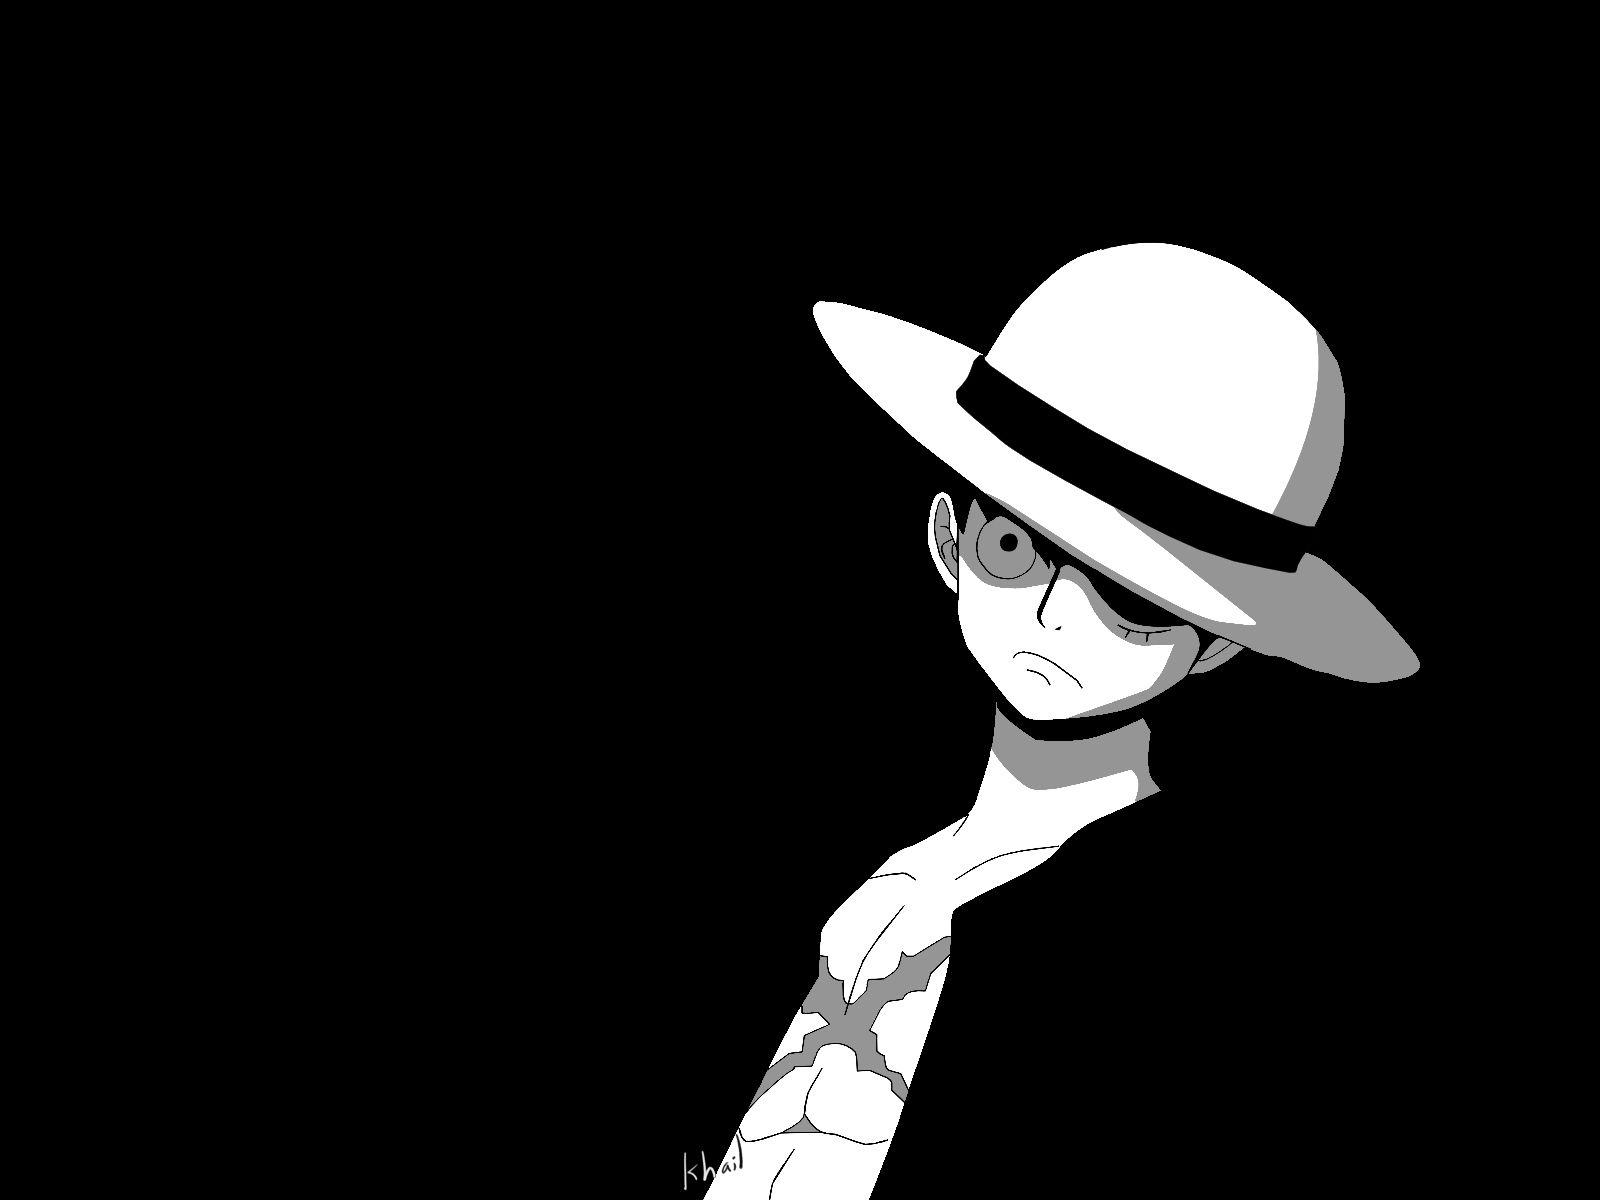 Luffy Black and White Wallpapers.